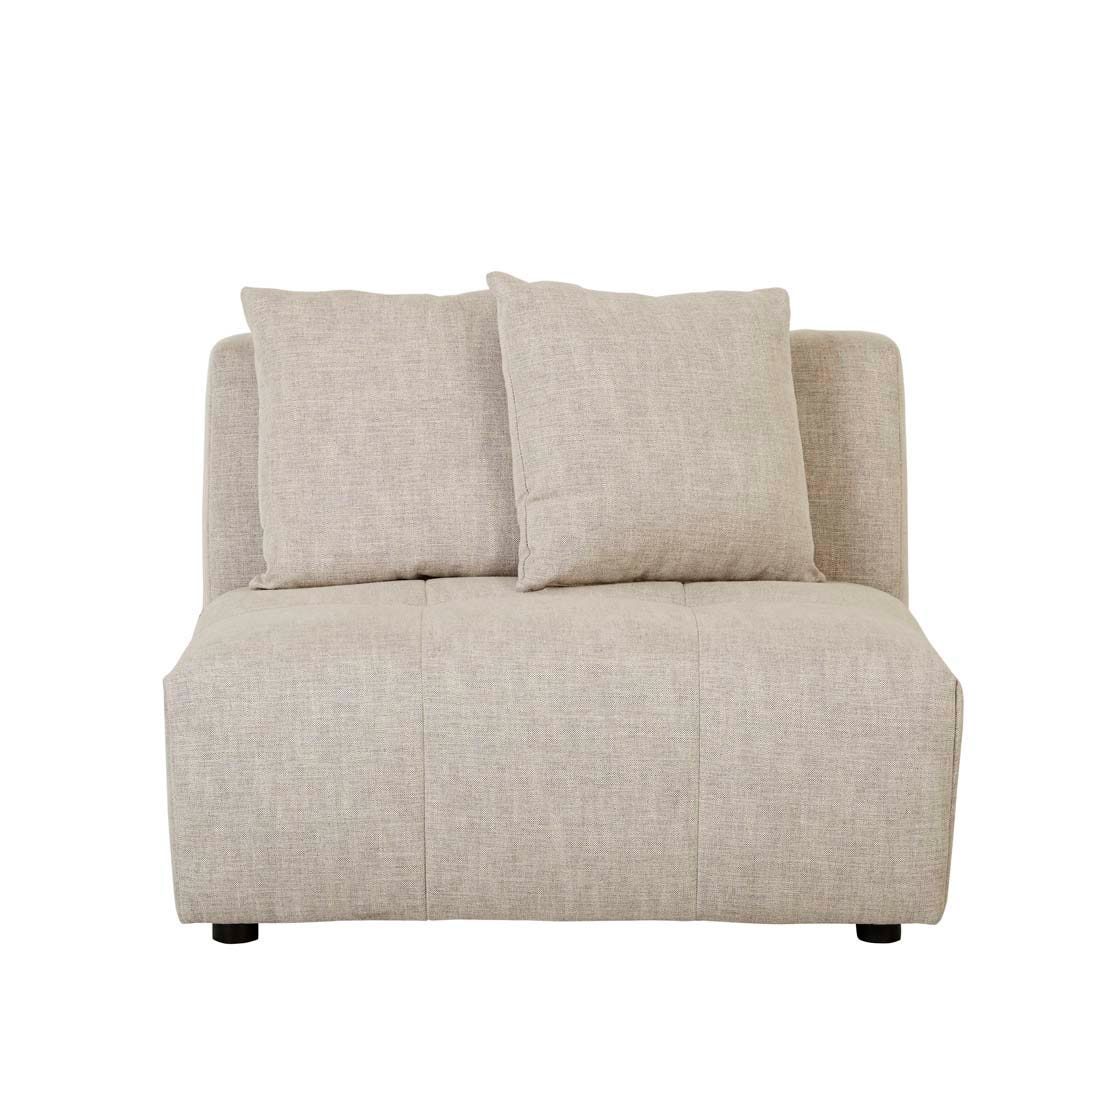 Sidney Slouch 1 Seater Centre Sofa - GlobeWest